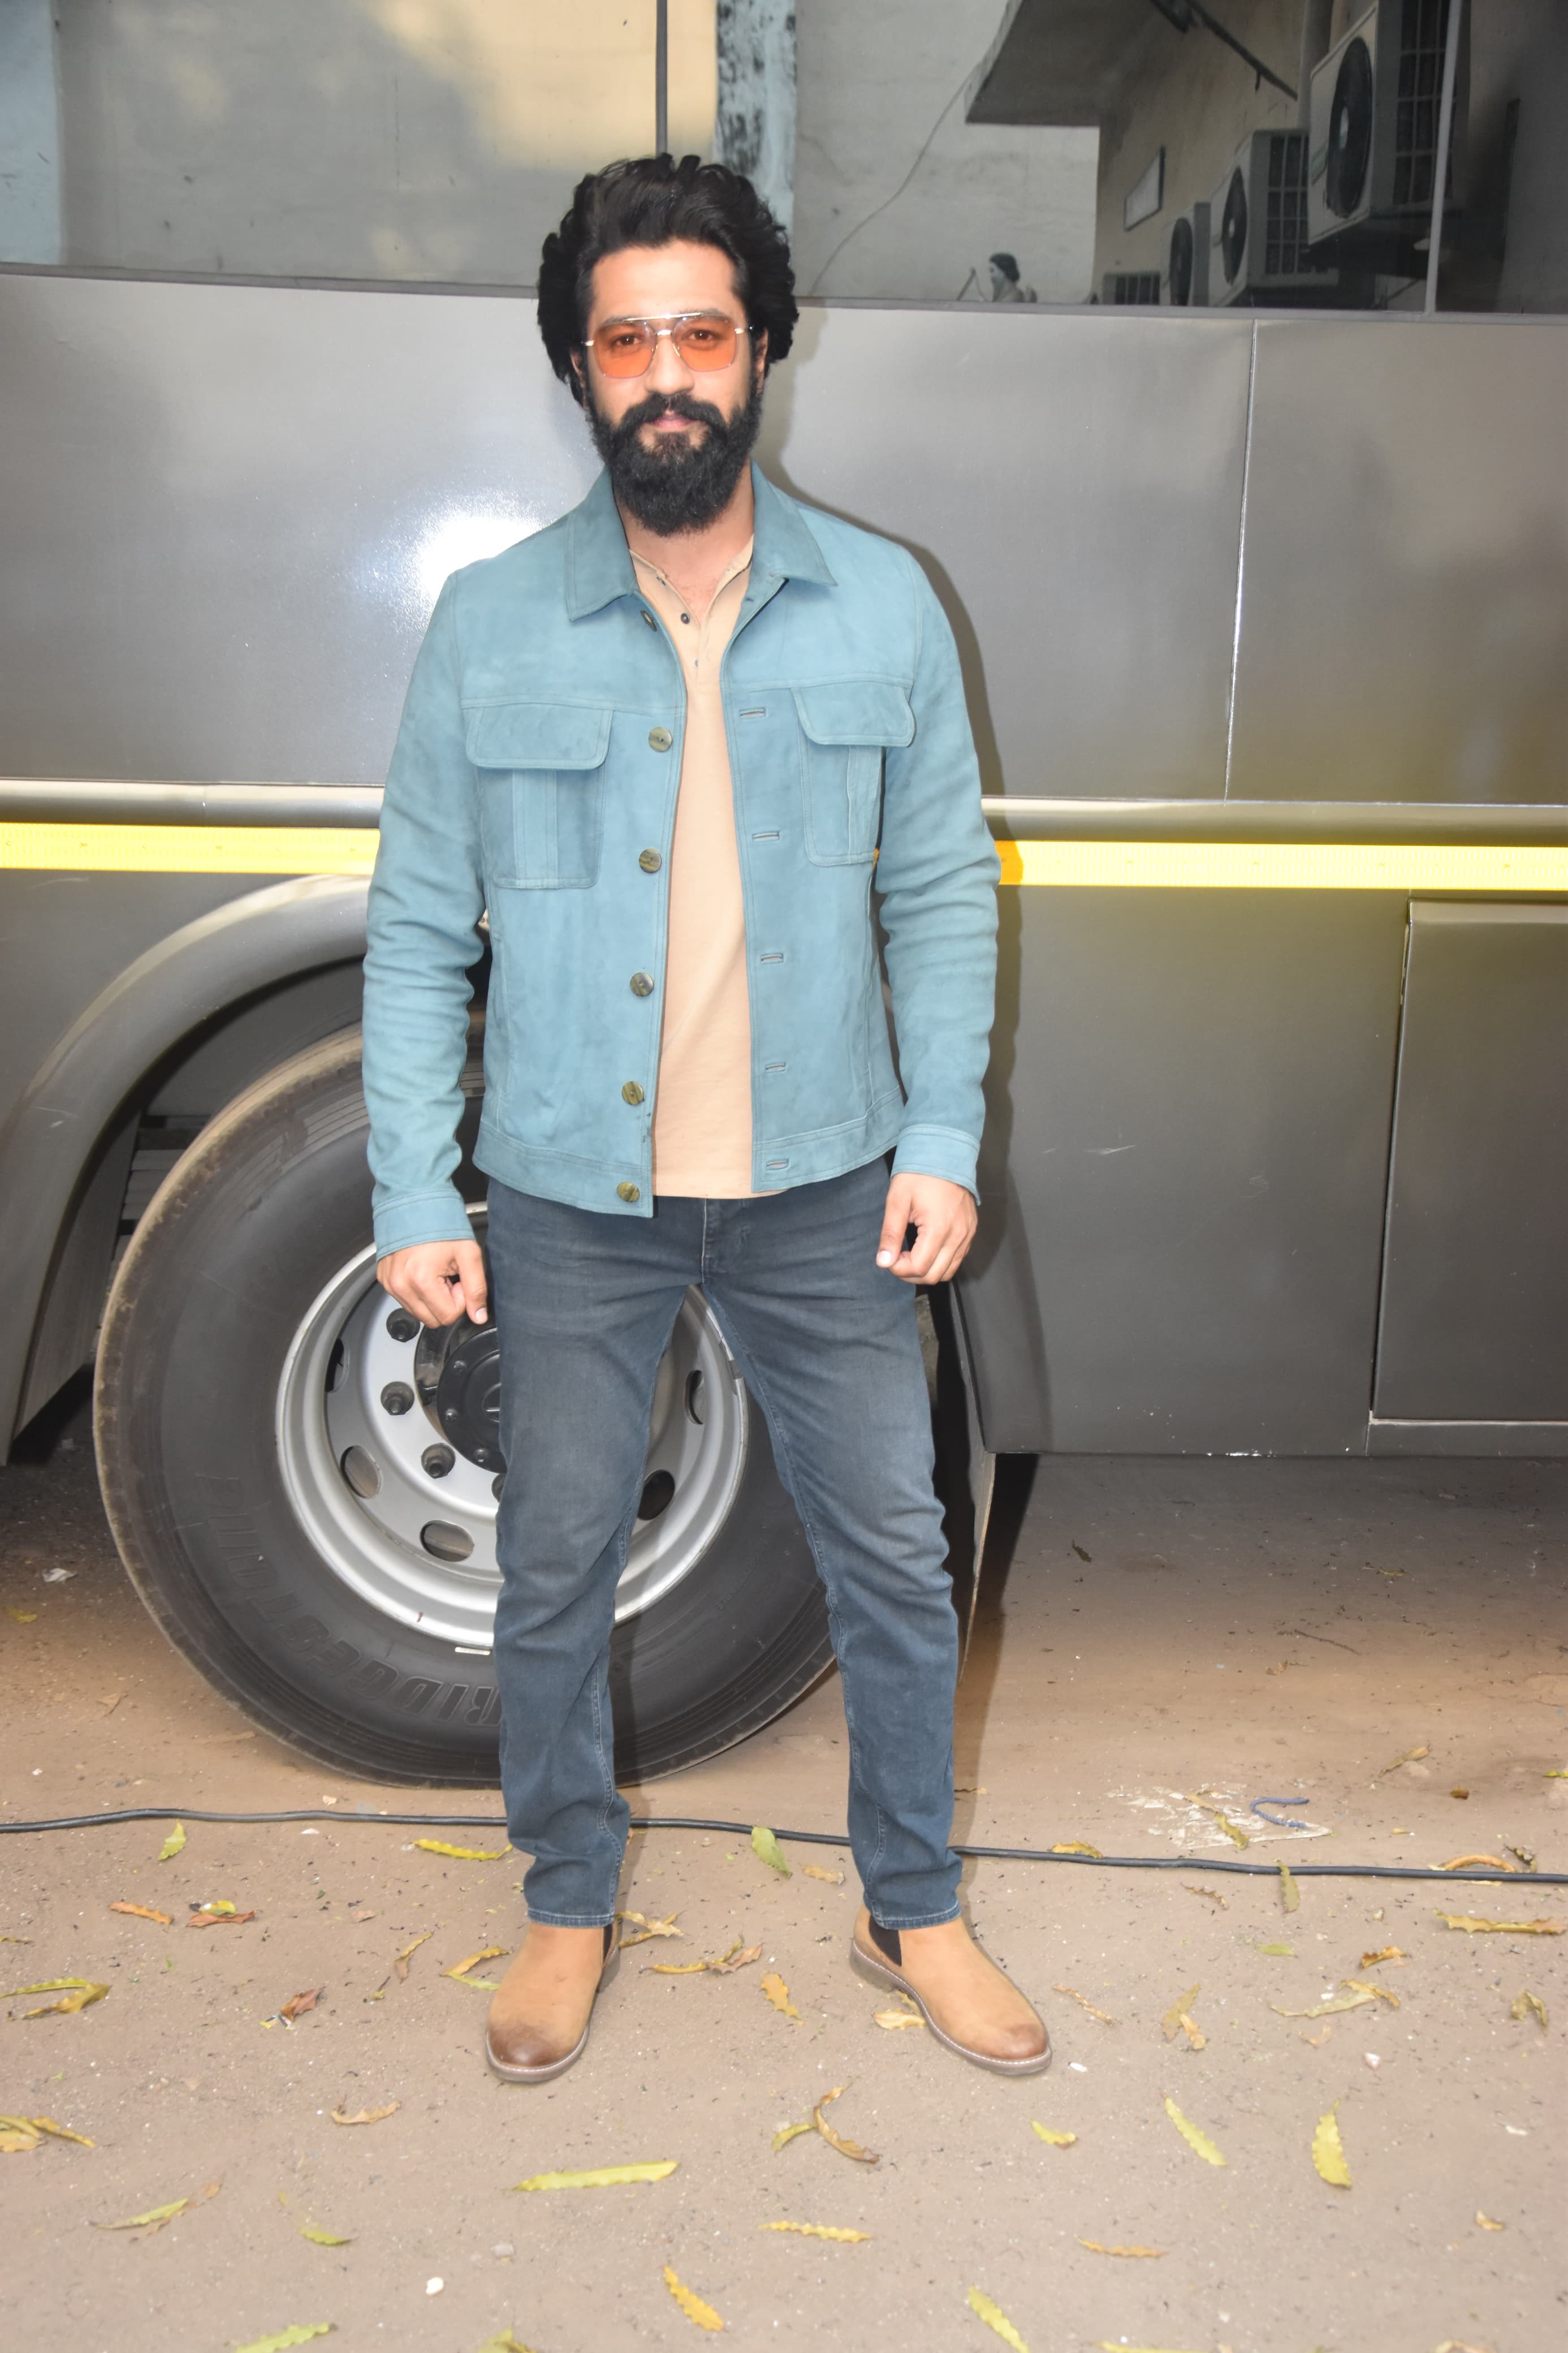 Vicky Kaushal was clicked as she went to promote his upcoming film, Sam Bahadur